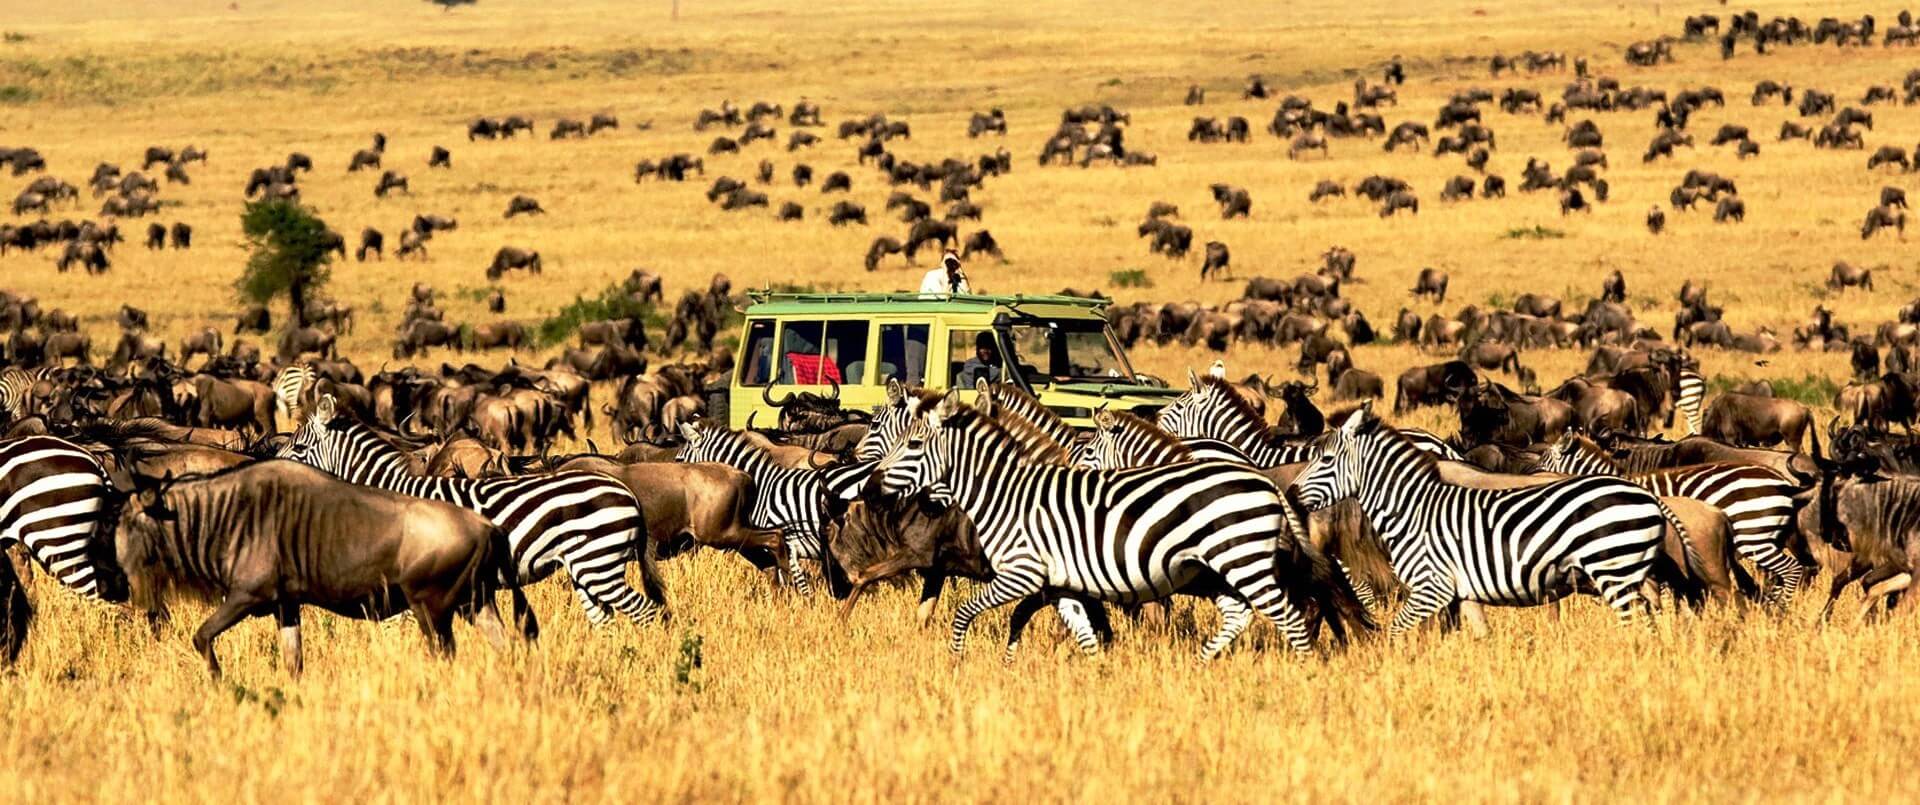 Best Places to Visit in Africa for First Timers